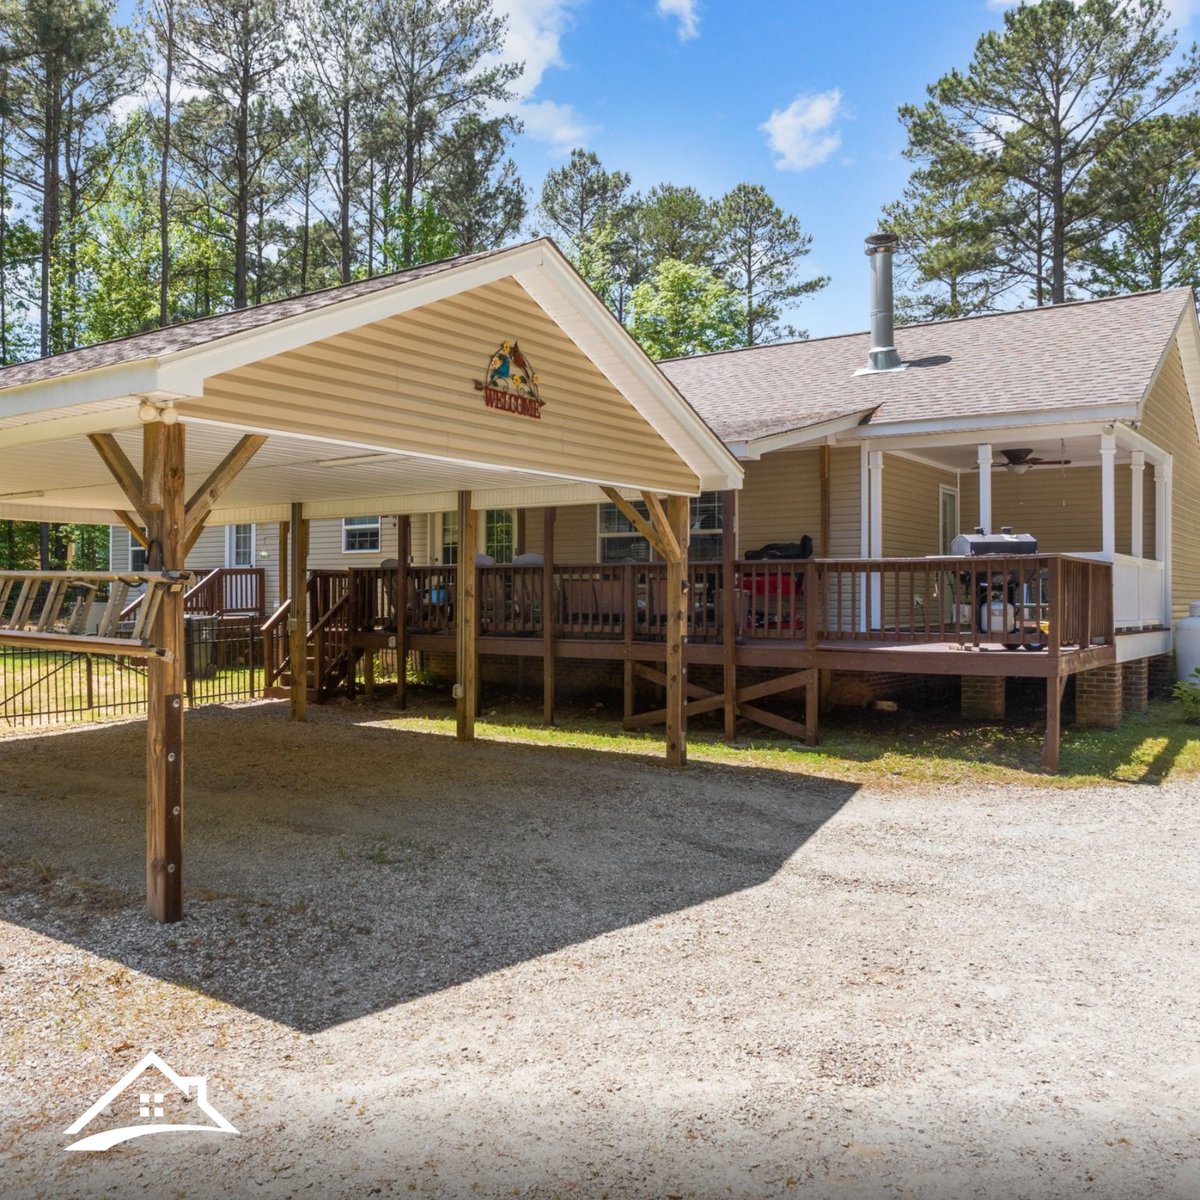 Charming ranch-style home set on a peaceful 1.56 acres! 📍346 Ballard Pruitt Road, Franklinton, NC 27525 🎯$325,000 3 bed | 2 bath | 1,640 sq.ft. | 1.56 acres 📞 (919) 845-9909 🌐 bit.ly/4aWYGGB #newlisting #franklinton #ranch #realestate #property #forsale